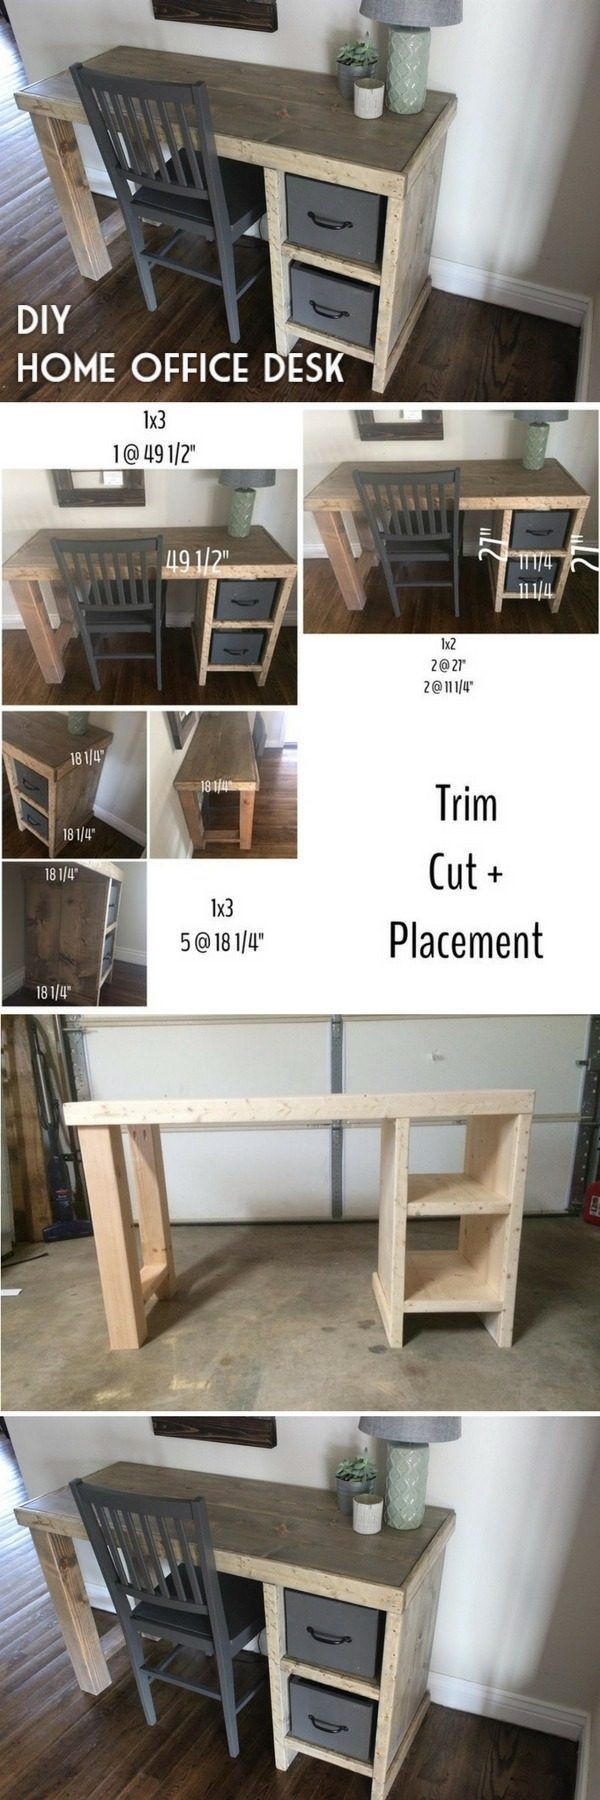 22 Cute Hardwood Floor Refinishing topeka Ks 2024 free download hardwood floor refinishing topeka ks of 82 best remodel images on pinterest bedroom ideas home ideas and within 40 easy awesome diy desks you can build on a budget